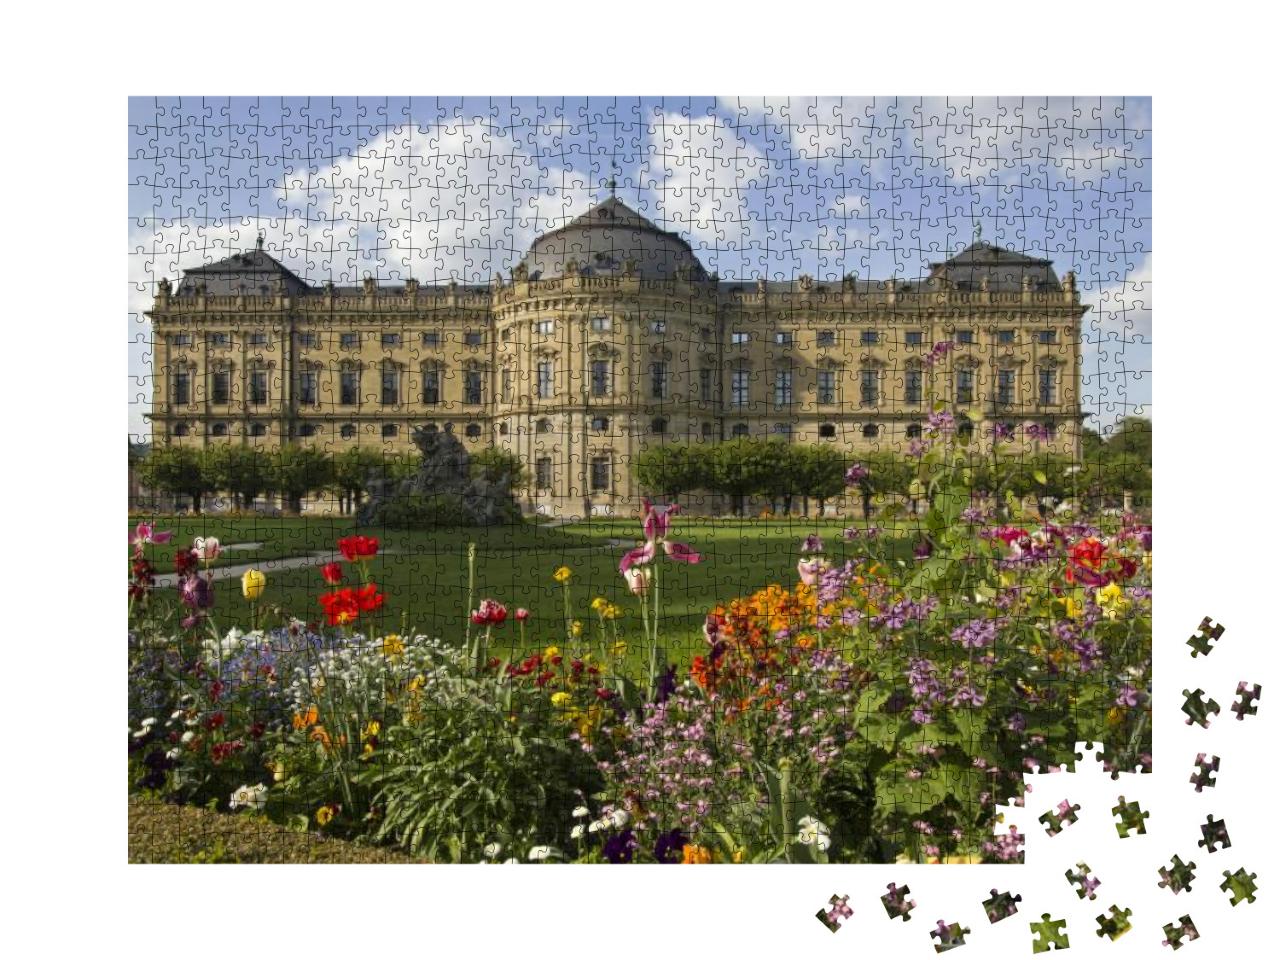 The Wurzburg Residence Building & Formal Garden with Flow... Jigsaw Puzzle with 1000 pieces